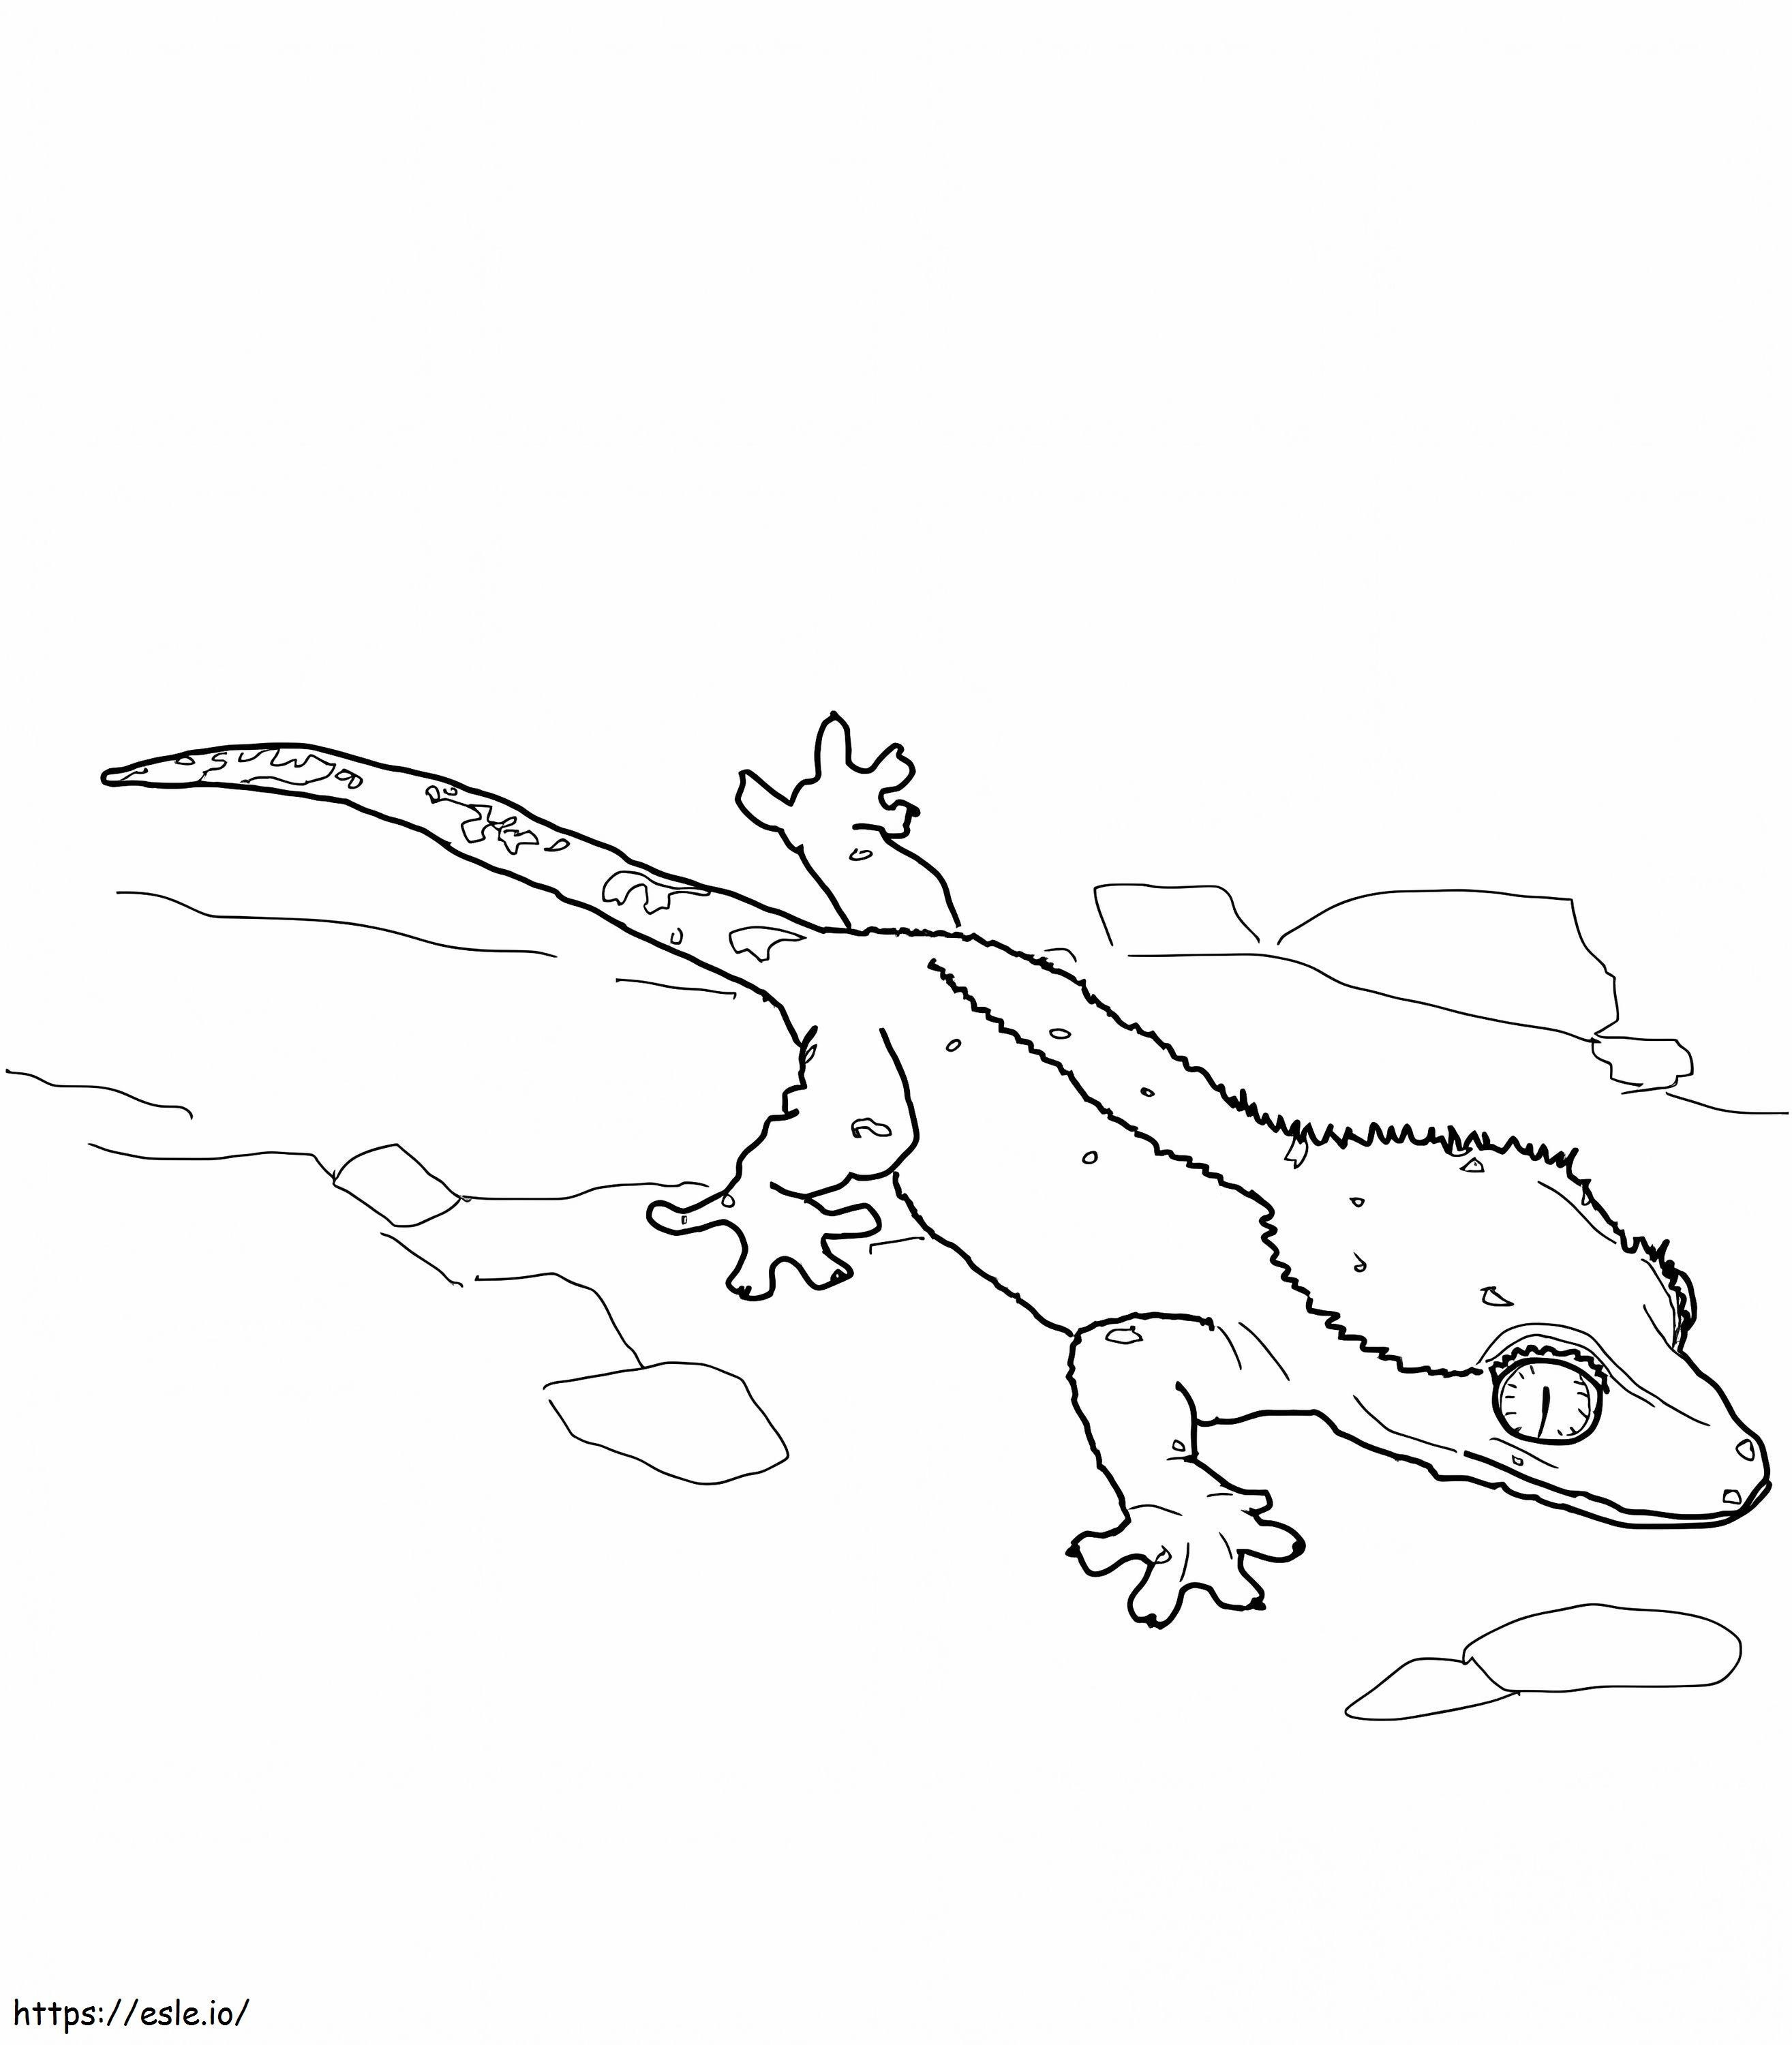 Crested gecko lizard coloring page